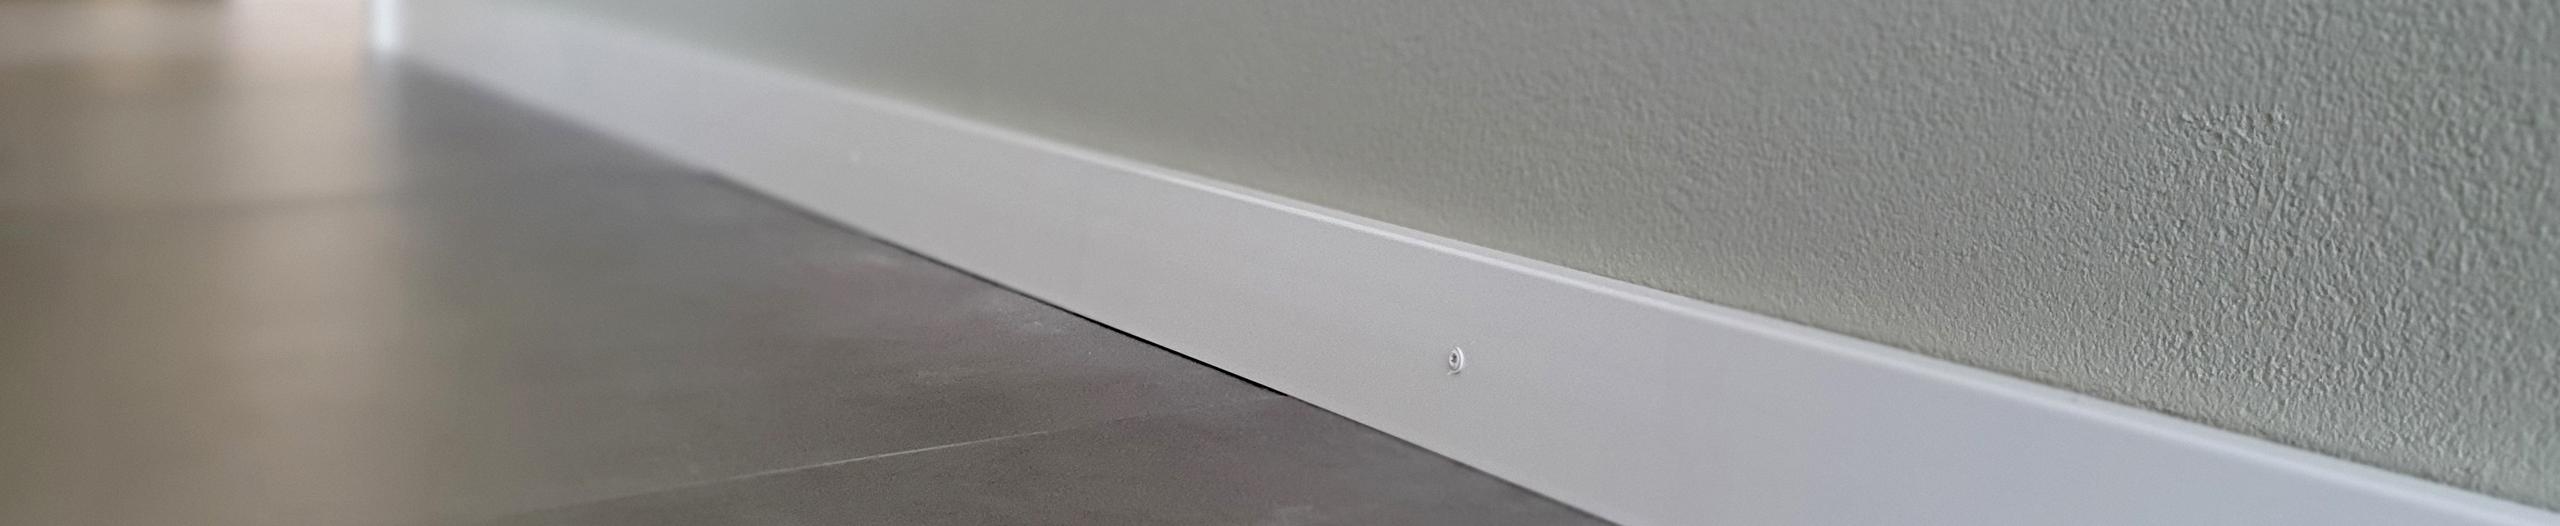 Skirting boards and coving